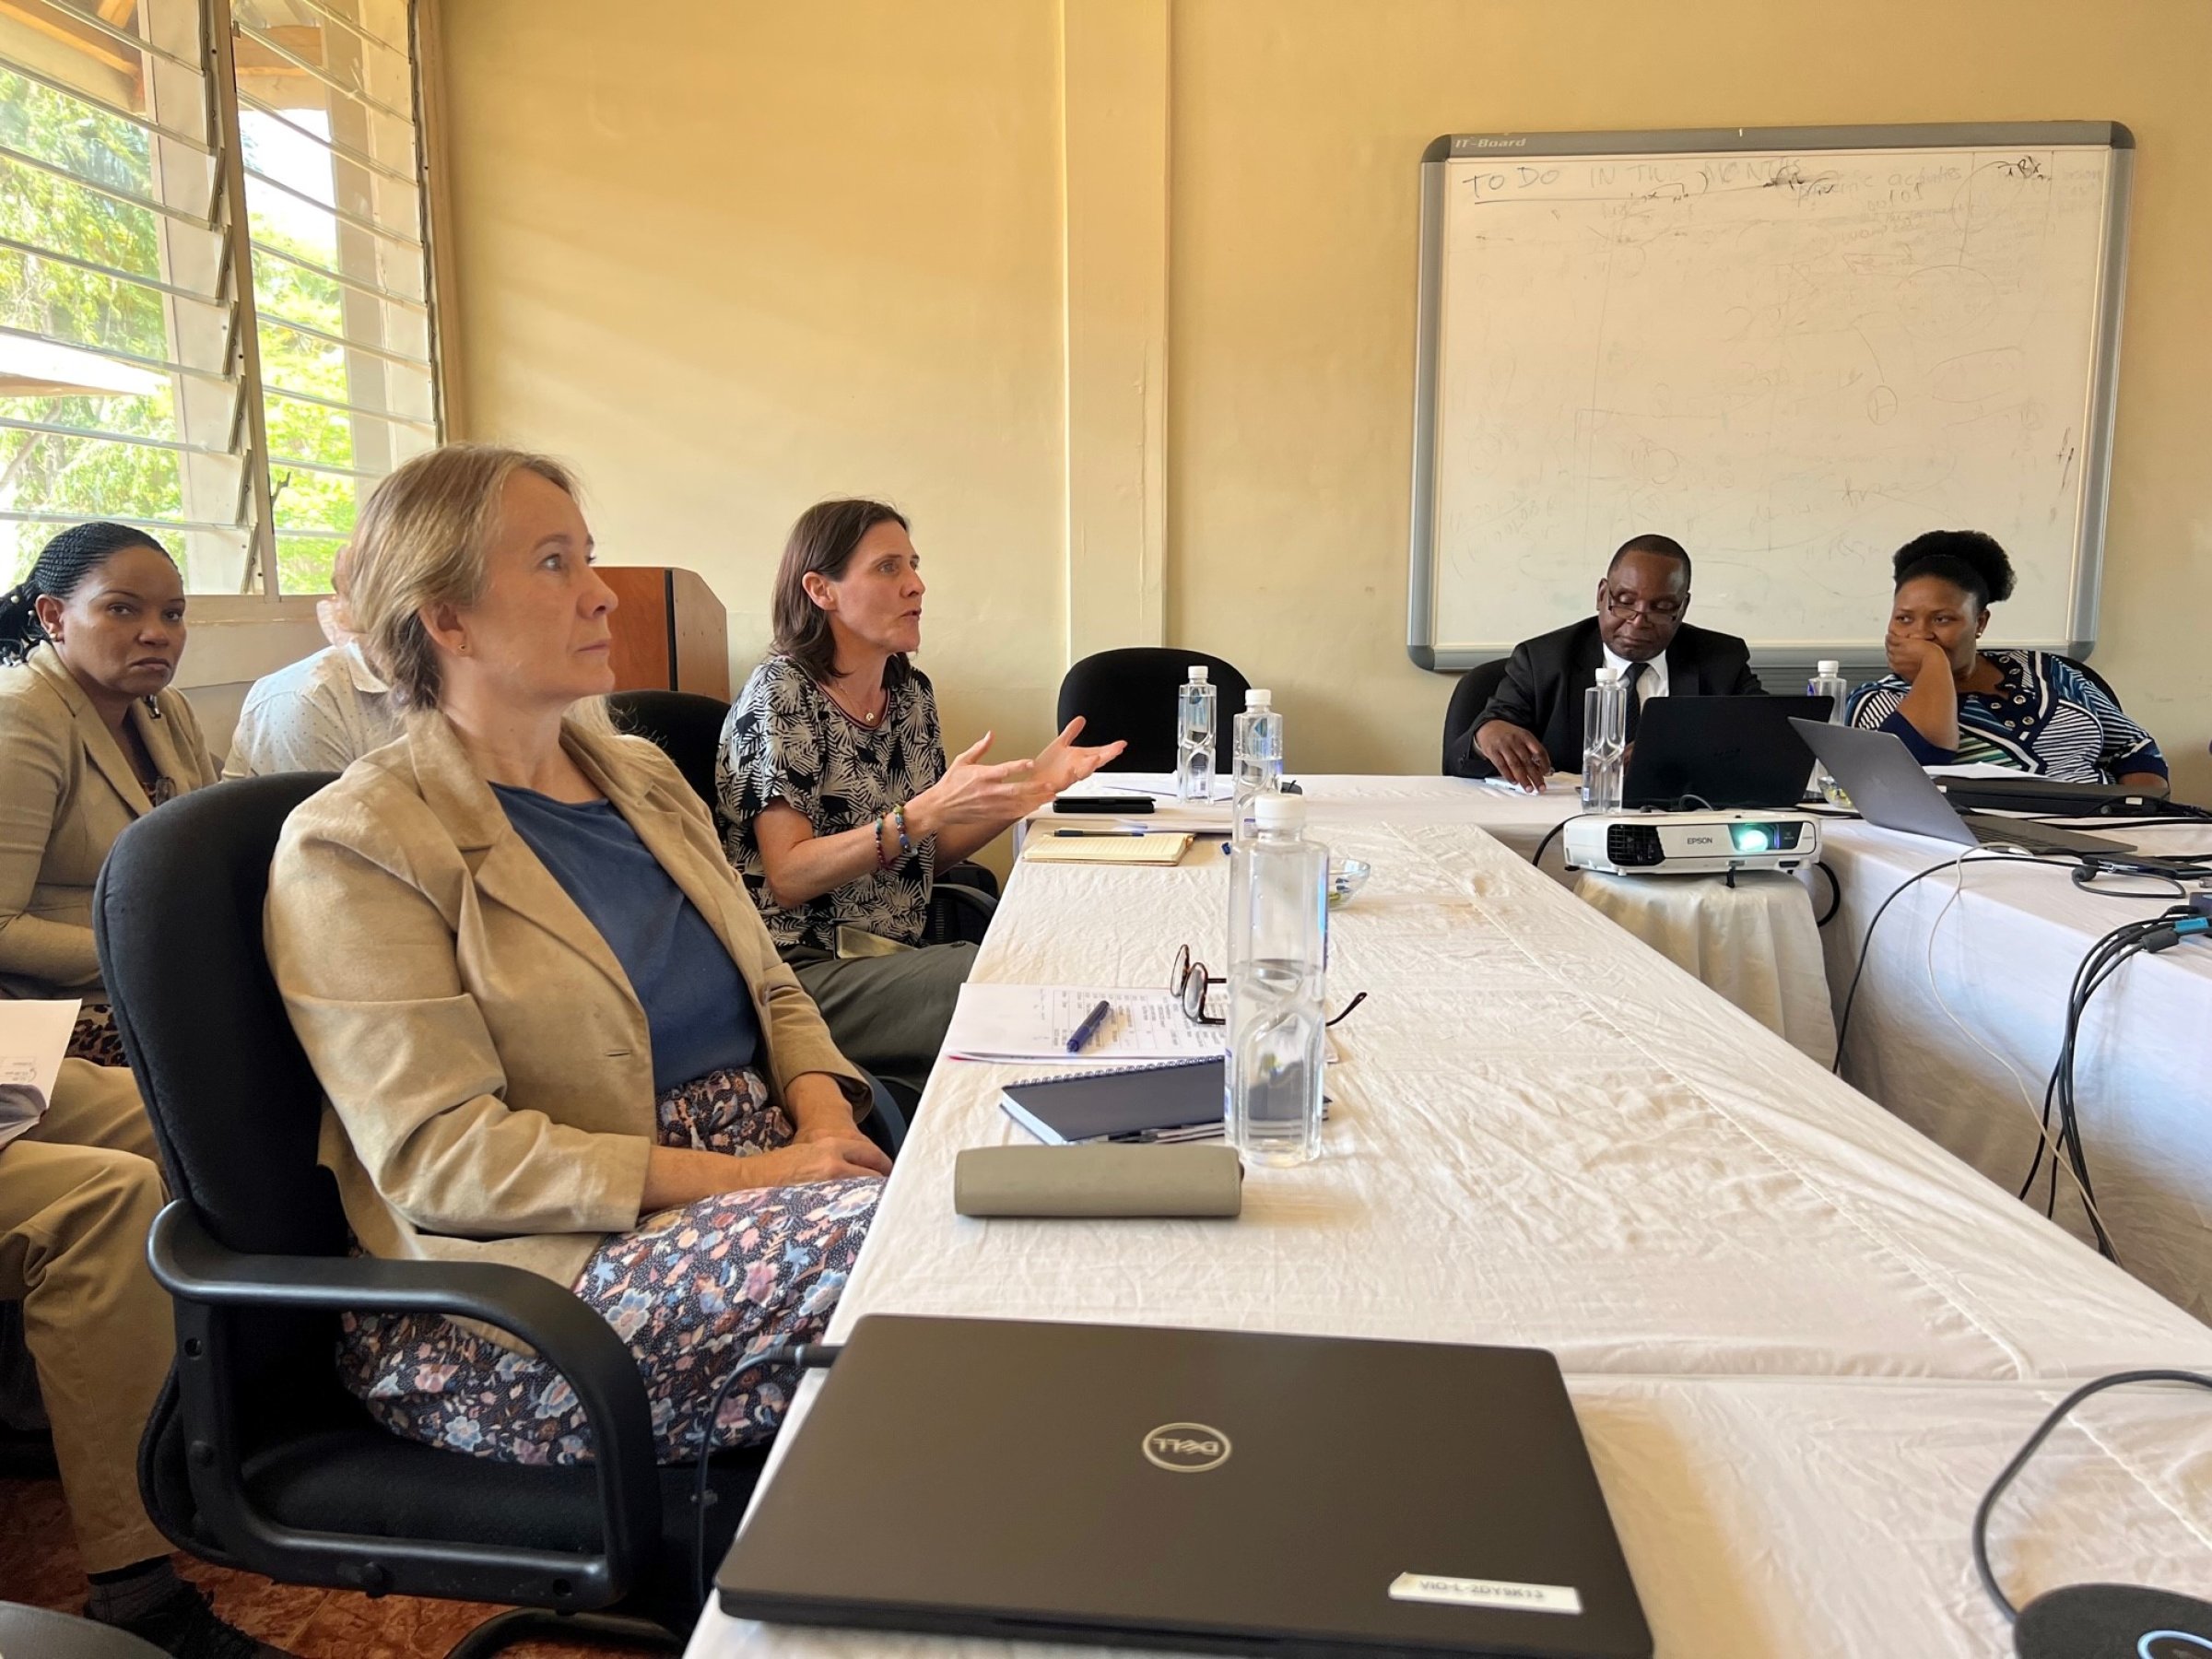 This is also a unique opportunity for Norwegian researchers who can learn from African colleagues about handling disease outbreaks, and thus strengthen our preparedness for new health threats. Photo: Bryndis Holm